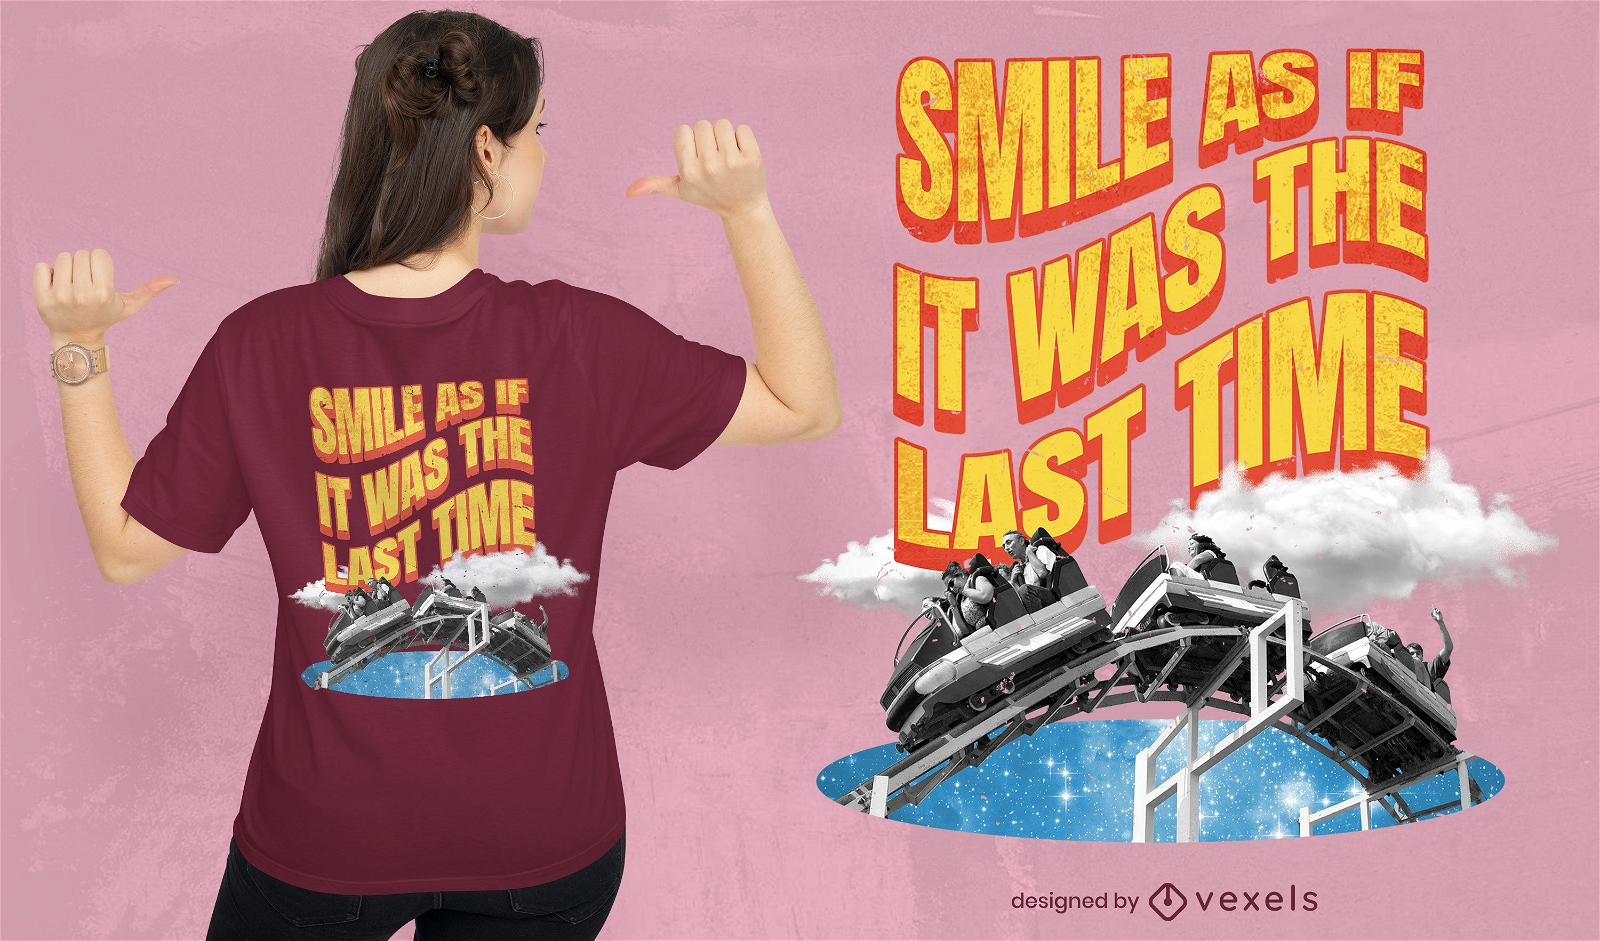 Roller coaster wagons in the sky t-shirt psd